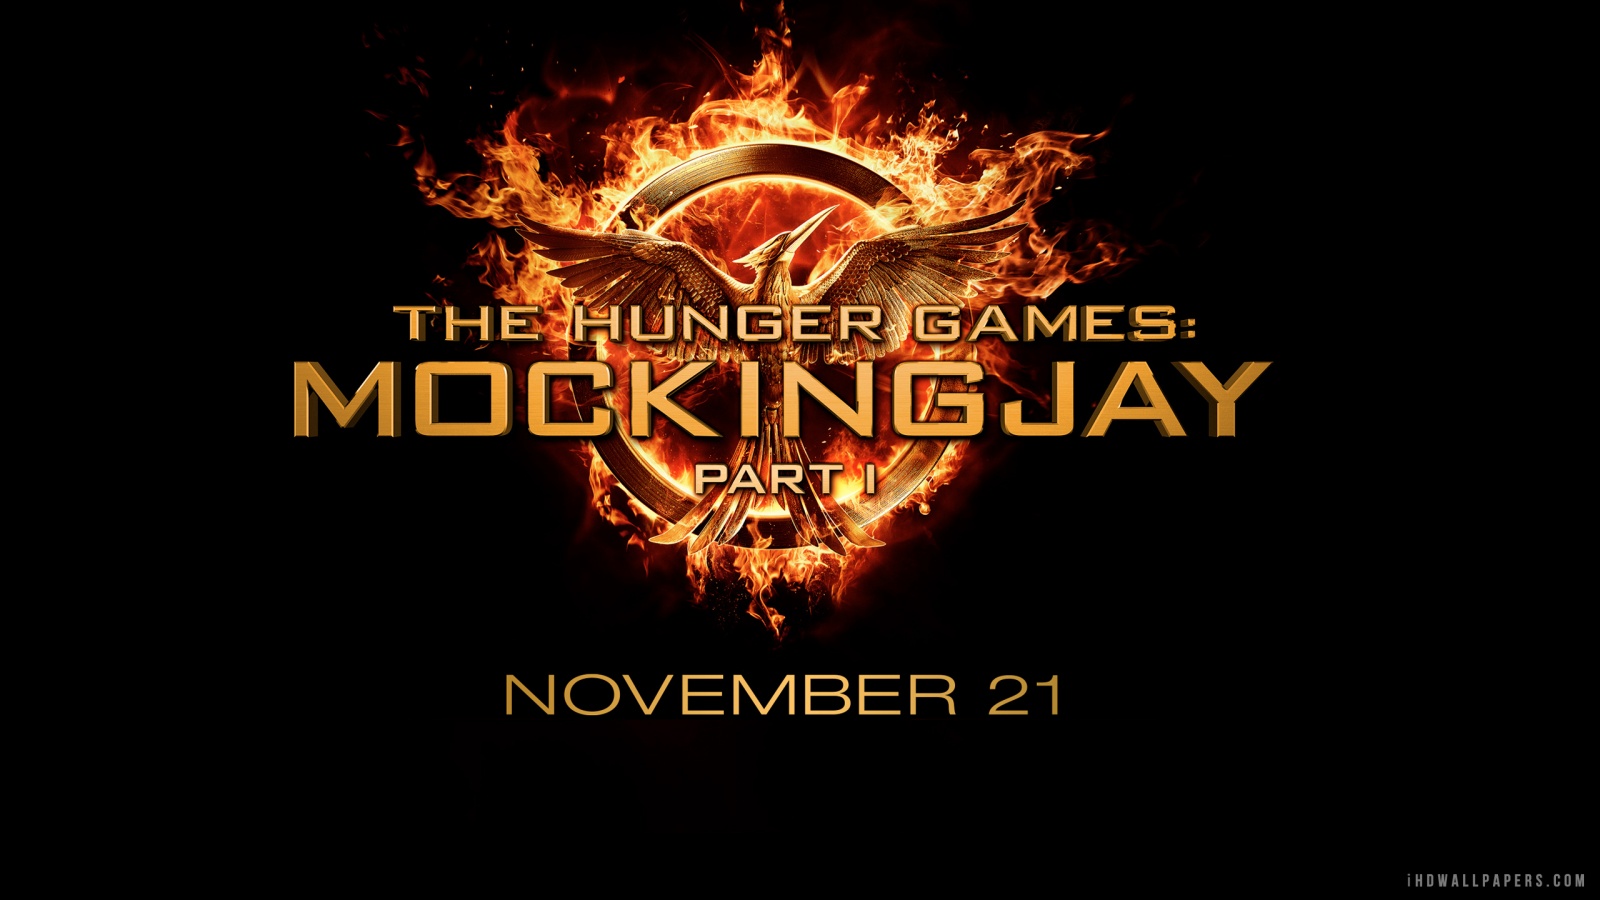 The Hunger Games Mockingjay Part 1 Title HD Wallpaper   iHD Wallpapers 1600x900